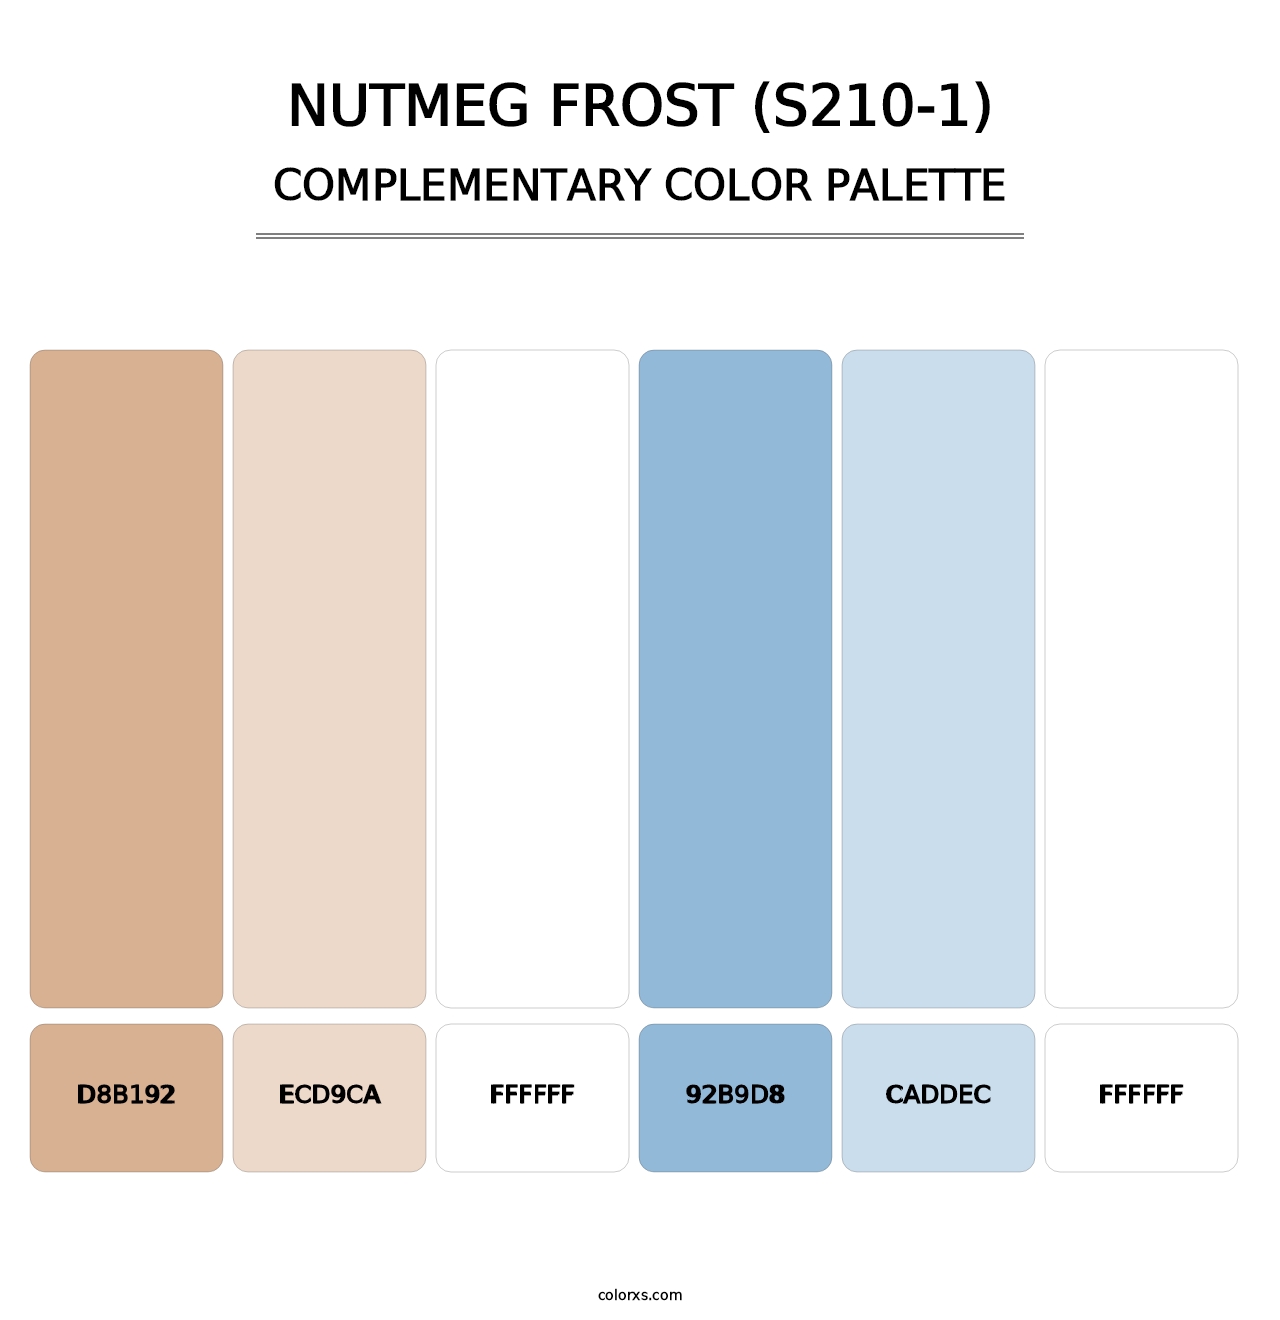 Nutmeg Frost (S210-1) - Complementary Color Palette